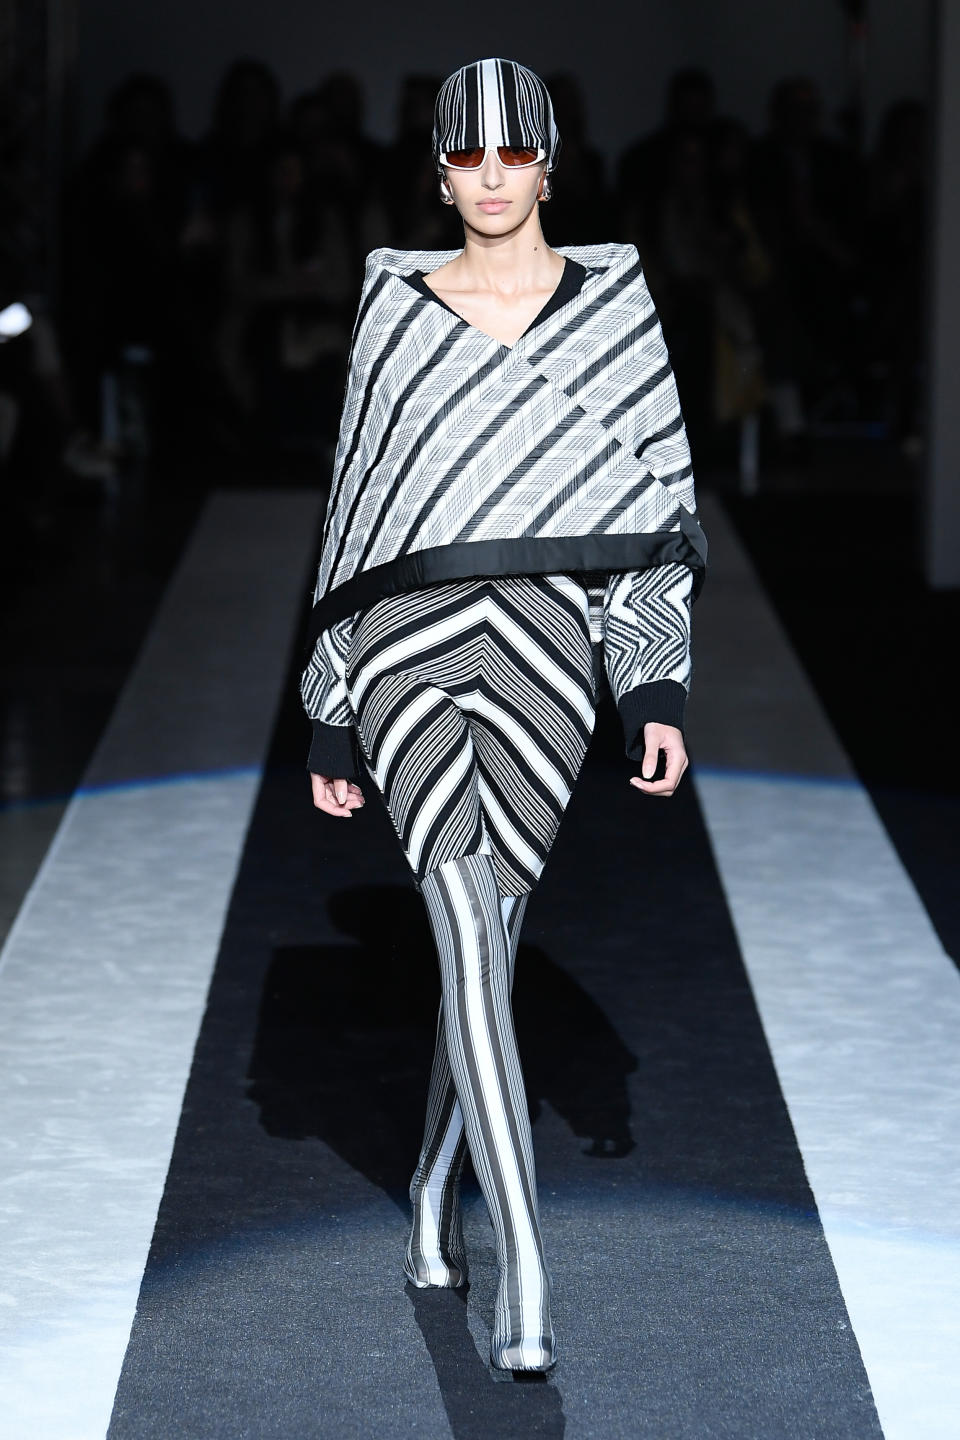 Model on the runway at Missoni RTW Fall 2024 as part of Milan Ready to Wear Fashion Week held on February 24, 2024 in Milan, Italy. (Photo by Giovanni Giannoni/WWD via Getty Images)